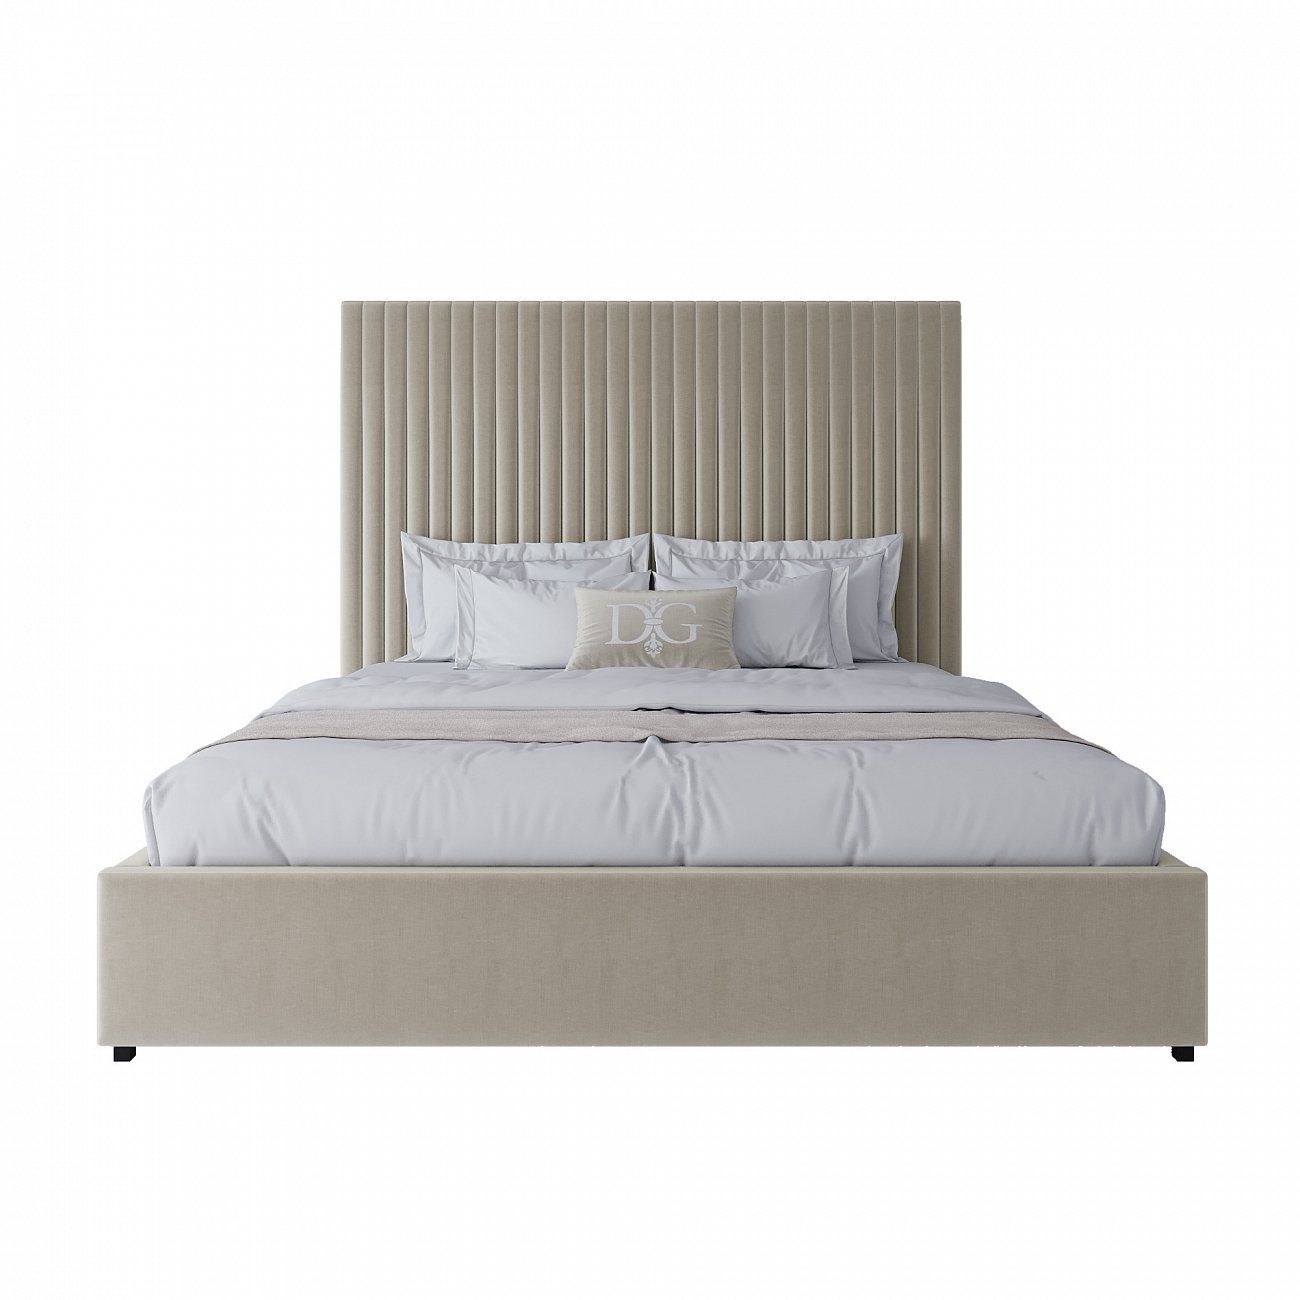 Double bed with upholstered headboard 180x200 cm white Mora